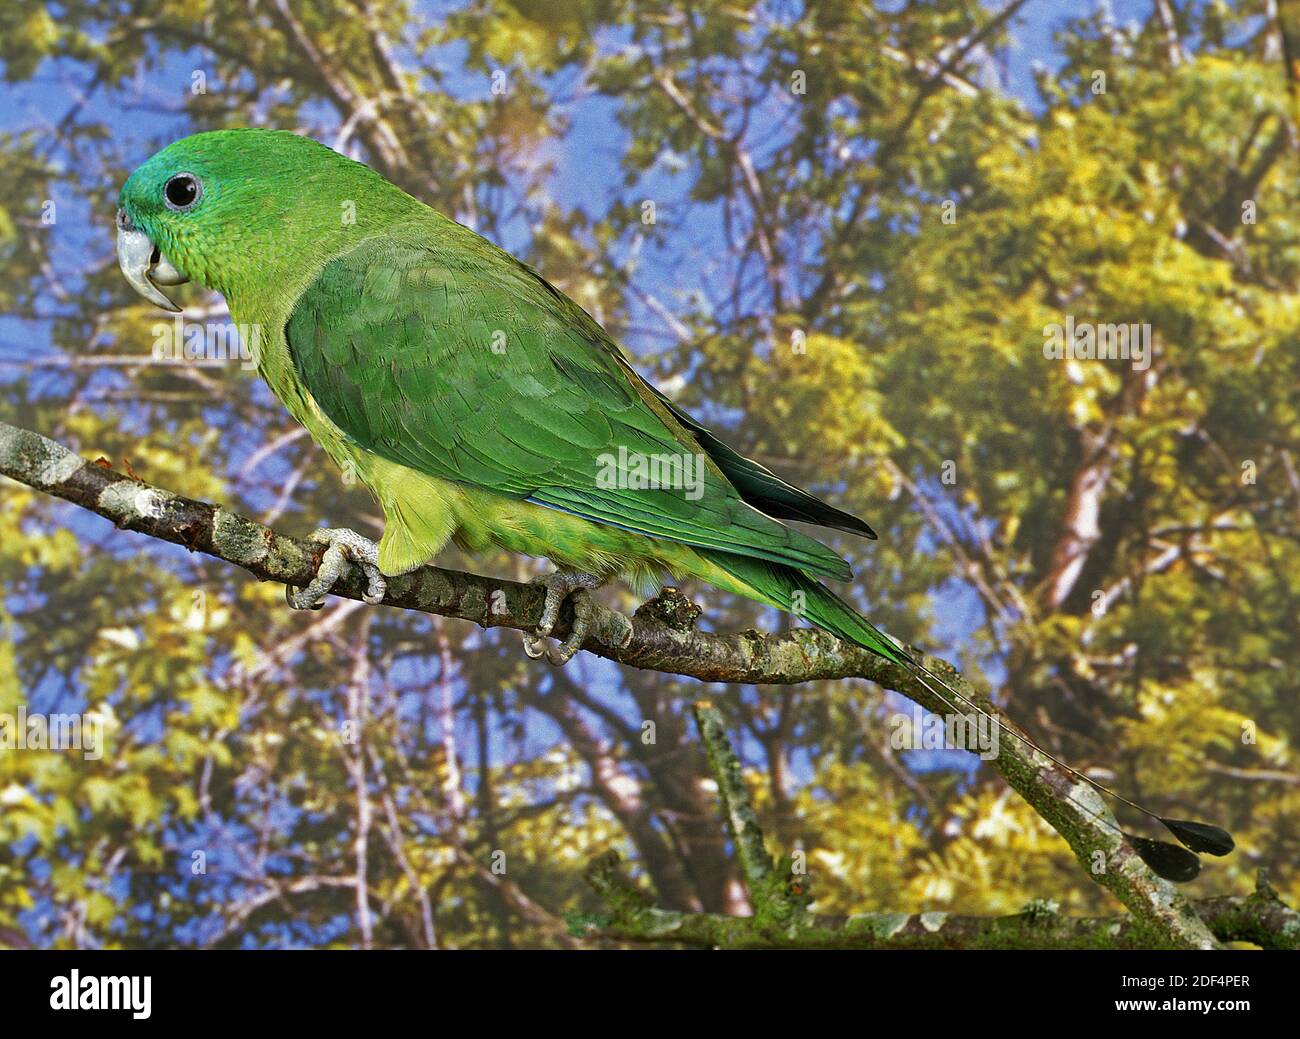 Racket-Tail Parrot, prioniturus sp., Adult standing on Branch Stock Photo